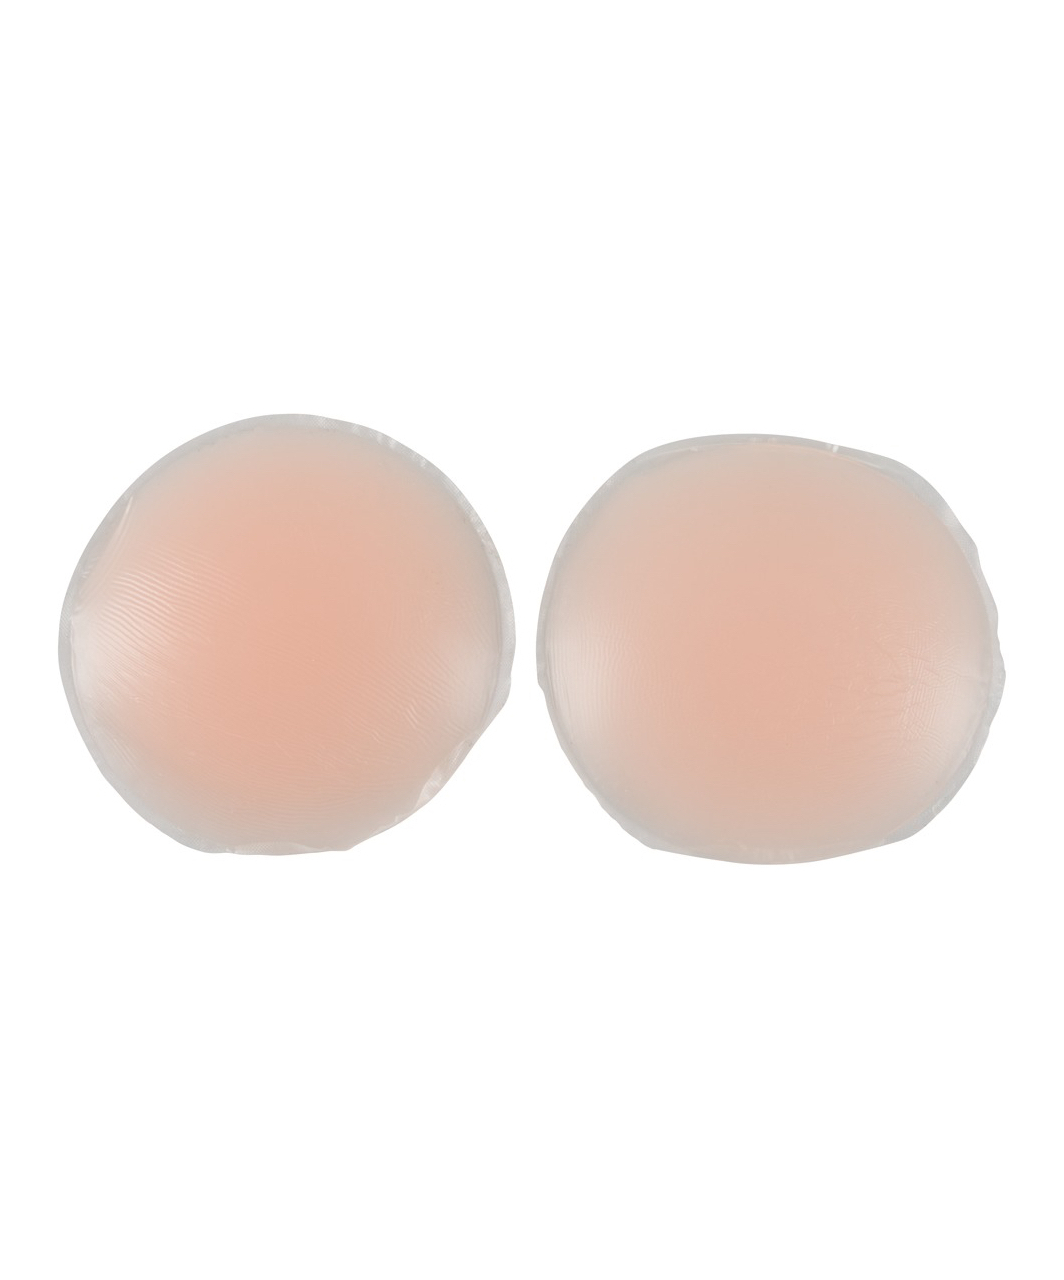 Cottelli Lingerie silicone nipple covers